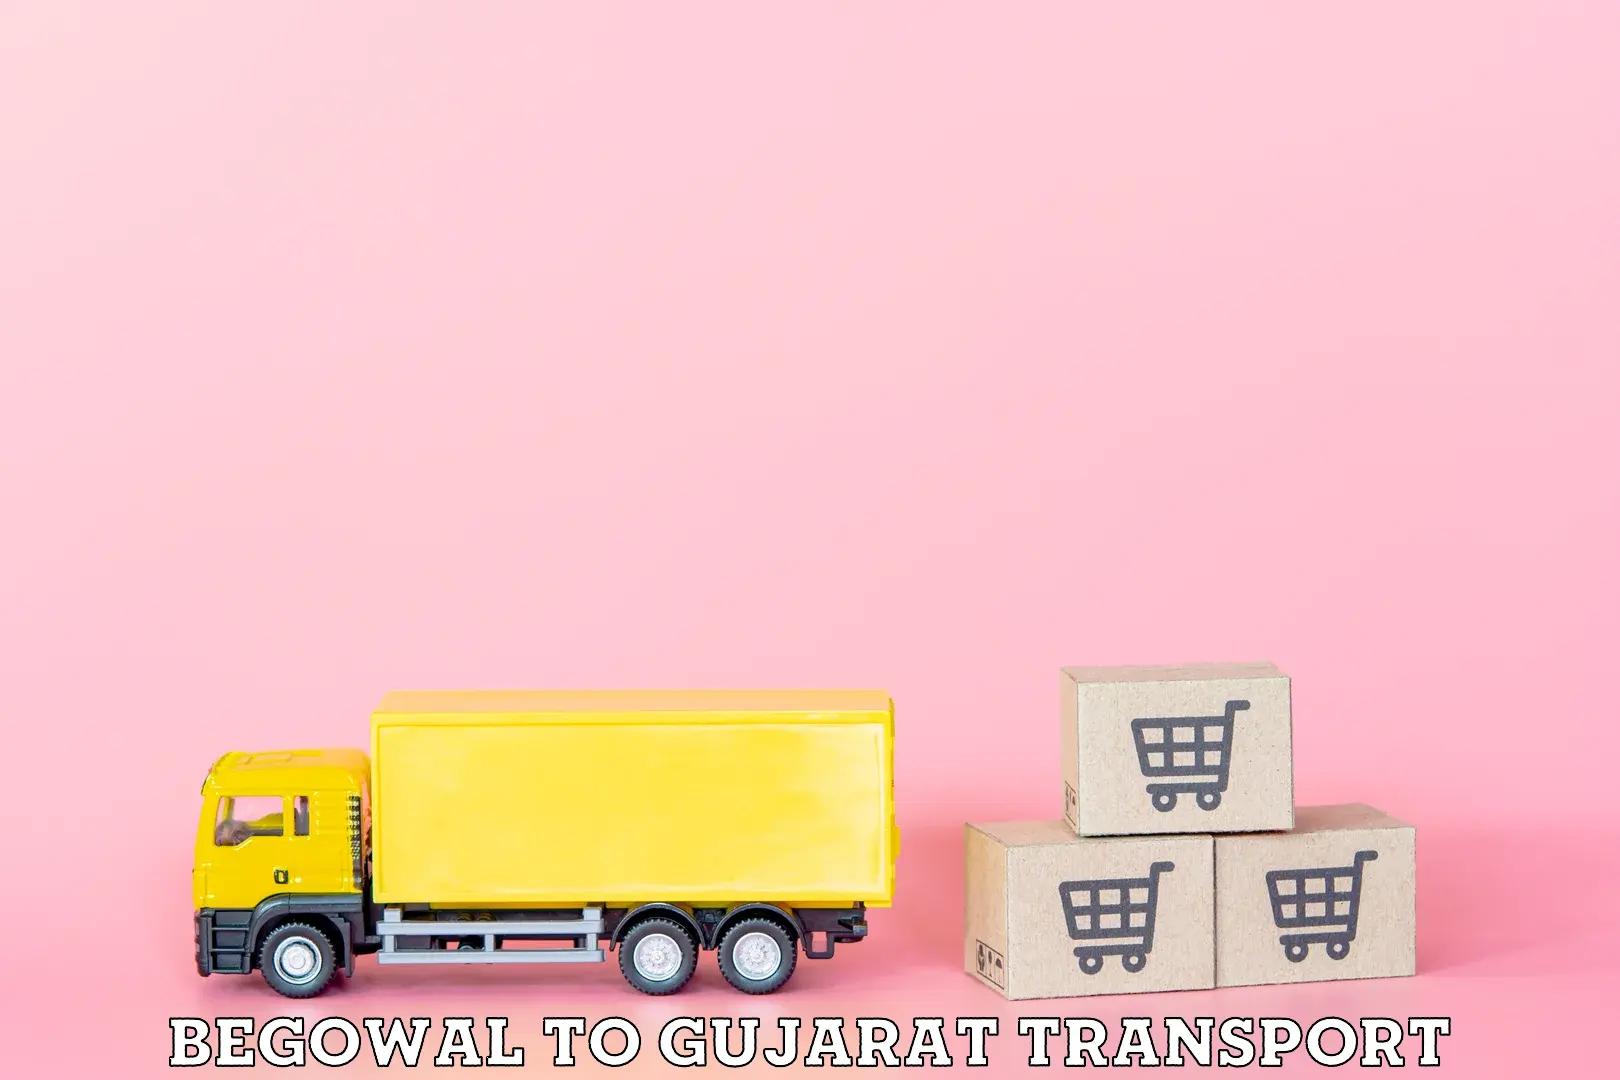 Commercial transport service Begowal to Anand Agricultural University